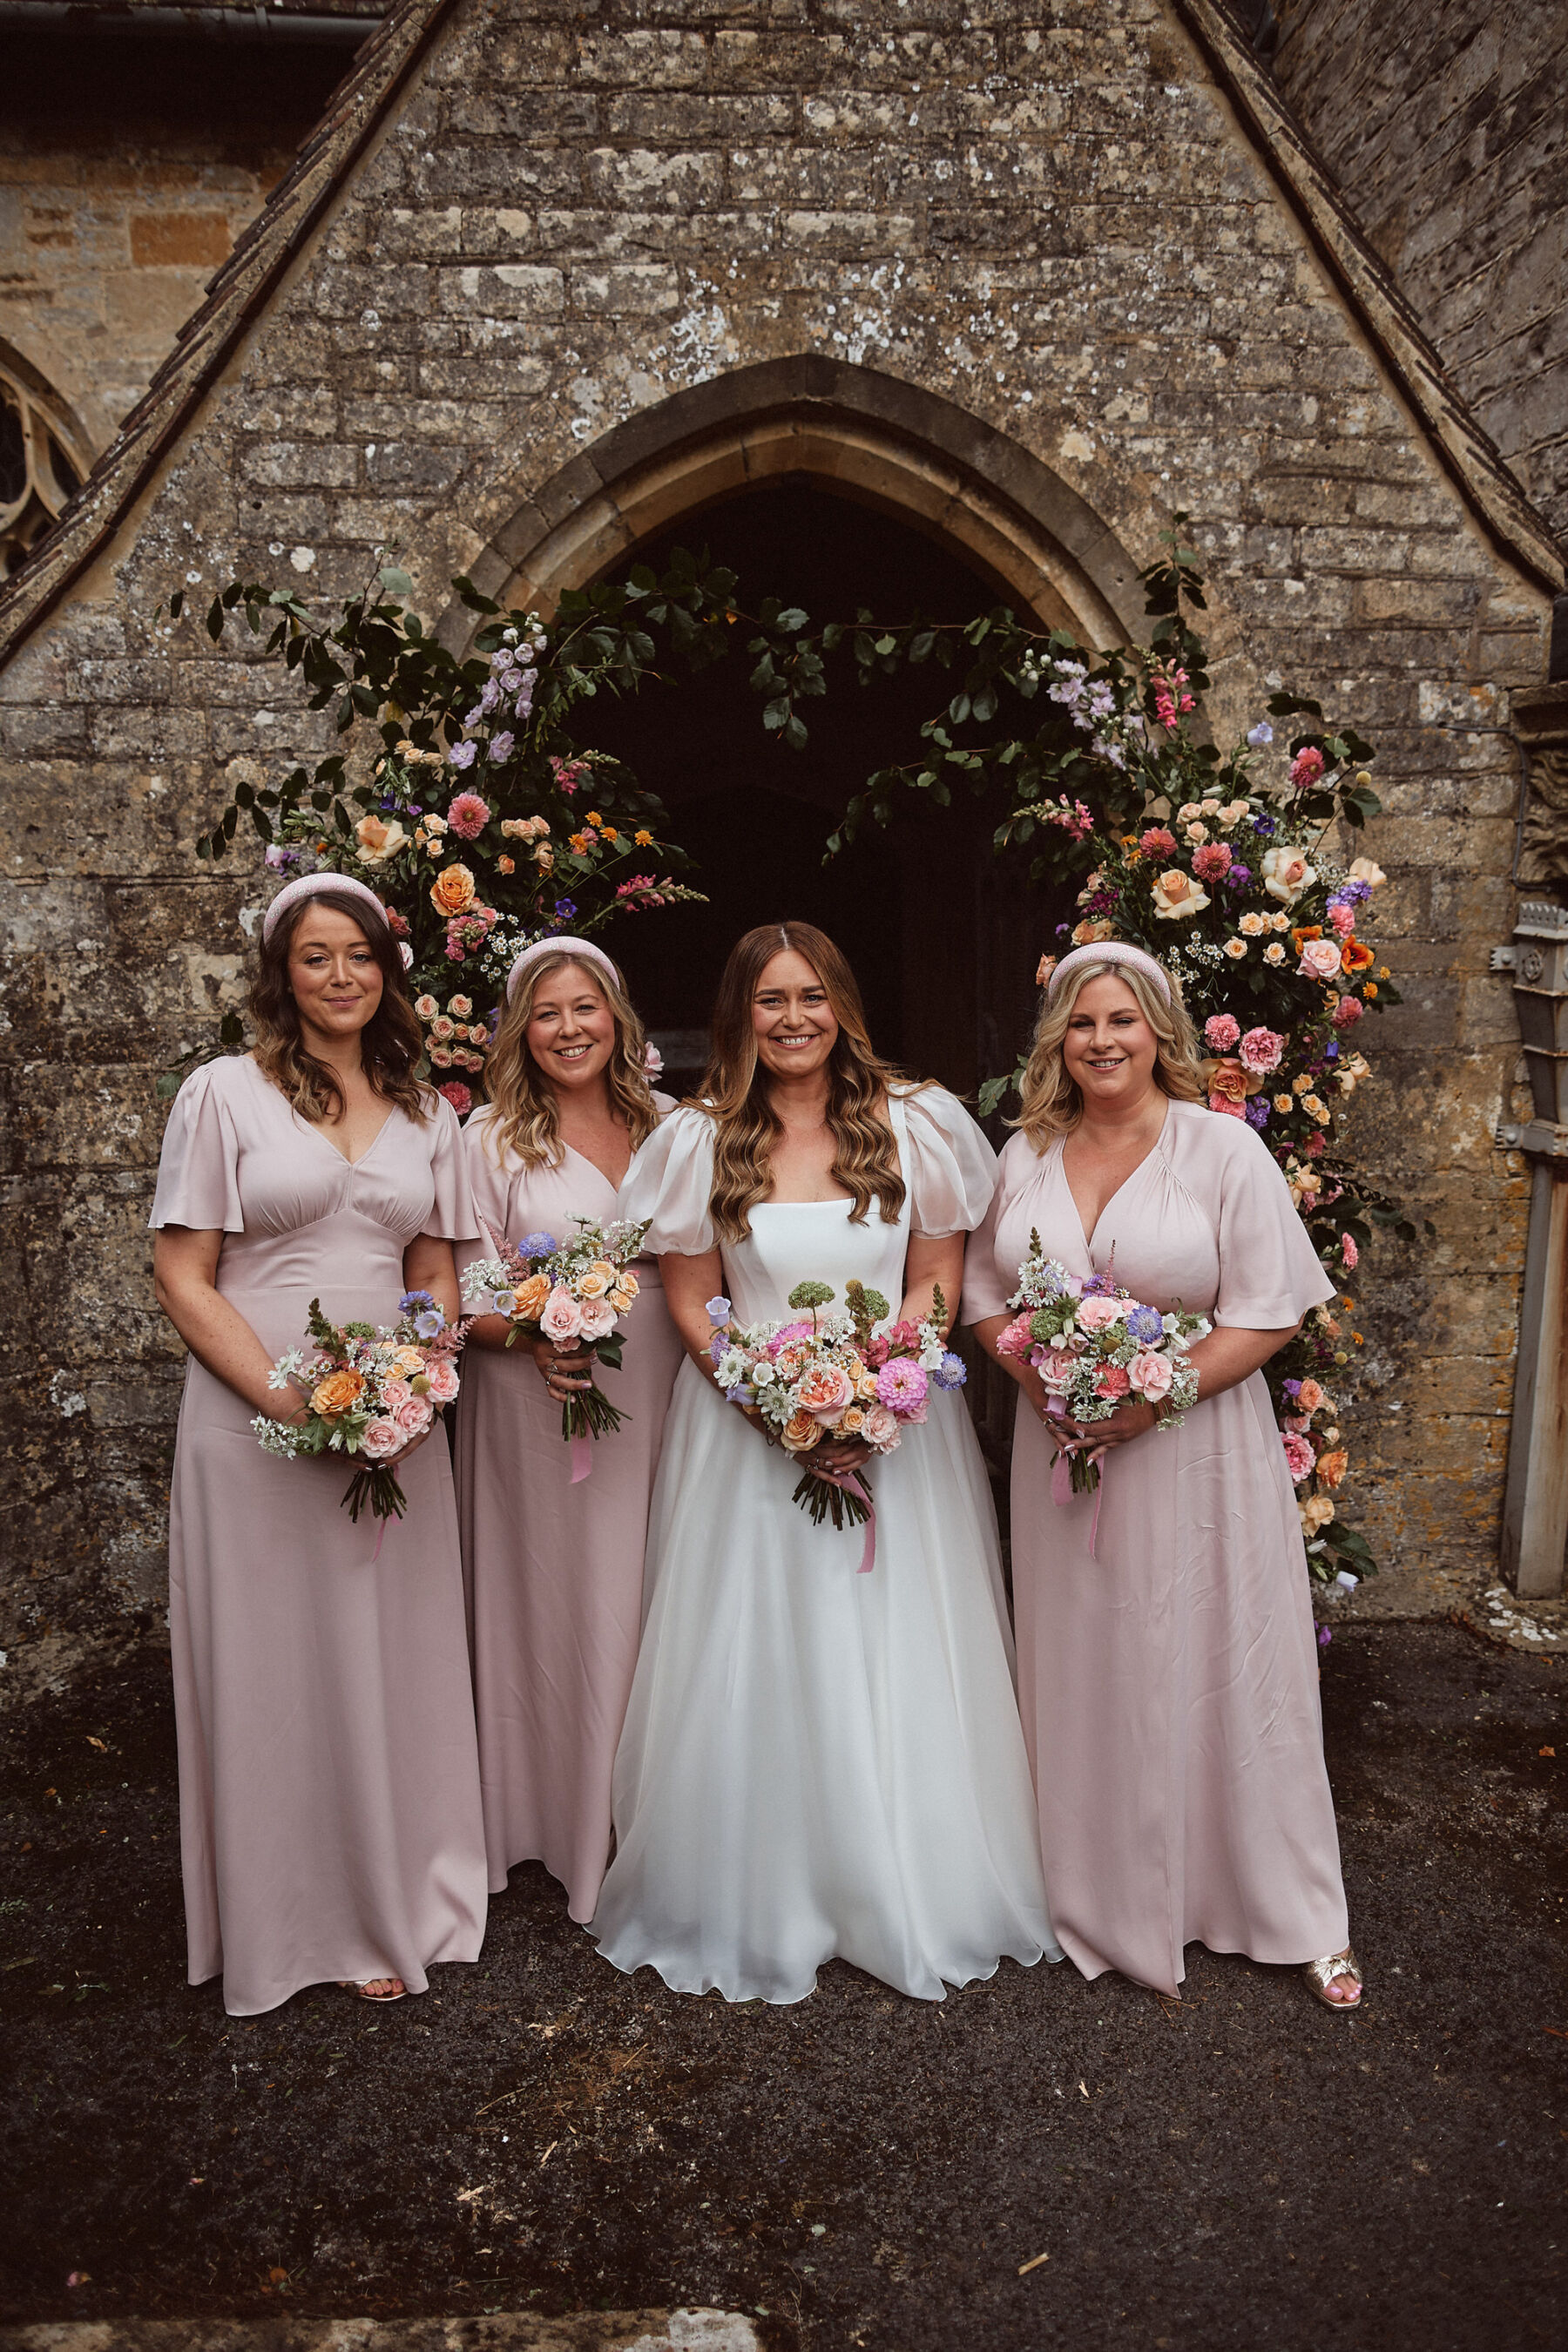 Bridesmaids in pink Maids to Measure bridesmaids dresses, standing with the bride in a puff sleeve Suzanne Neville dress buy a church door decorated with colourful flowers.